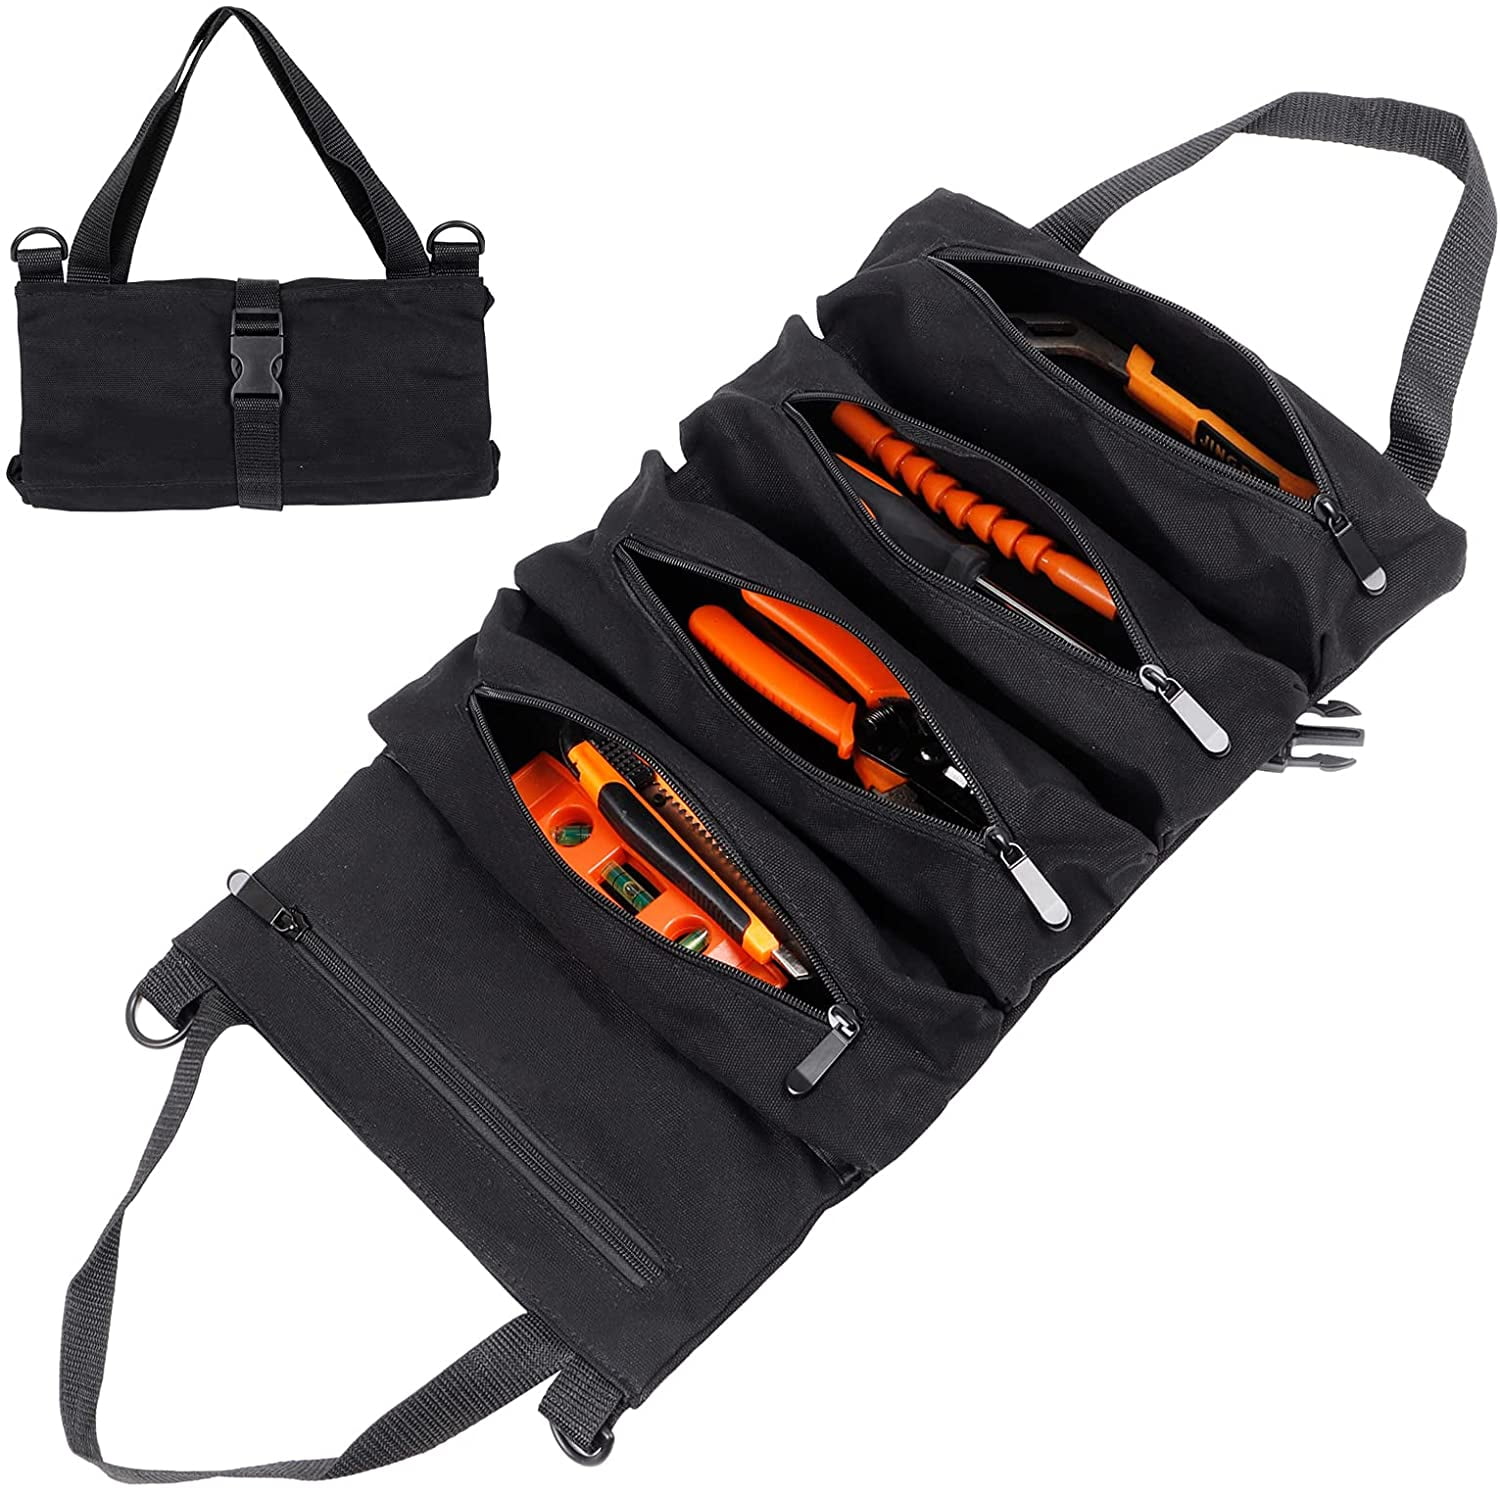 Tool Roll Up Bag, Canvas Multi-Purpose Wrench Roll Up Bag, 5 Zipper Tool Pockets Electricians Tool Roll Organizer, Hanging Tool Zipper Carrier Tote